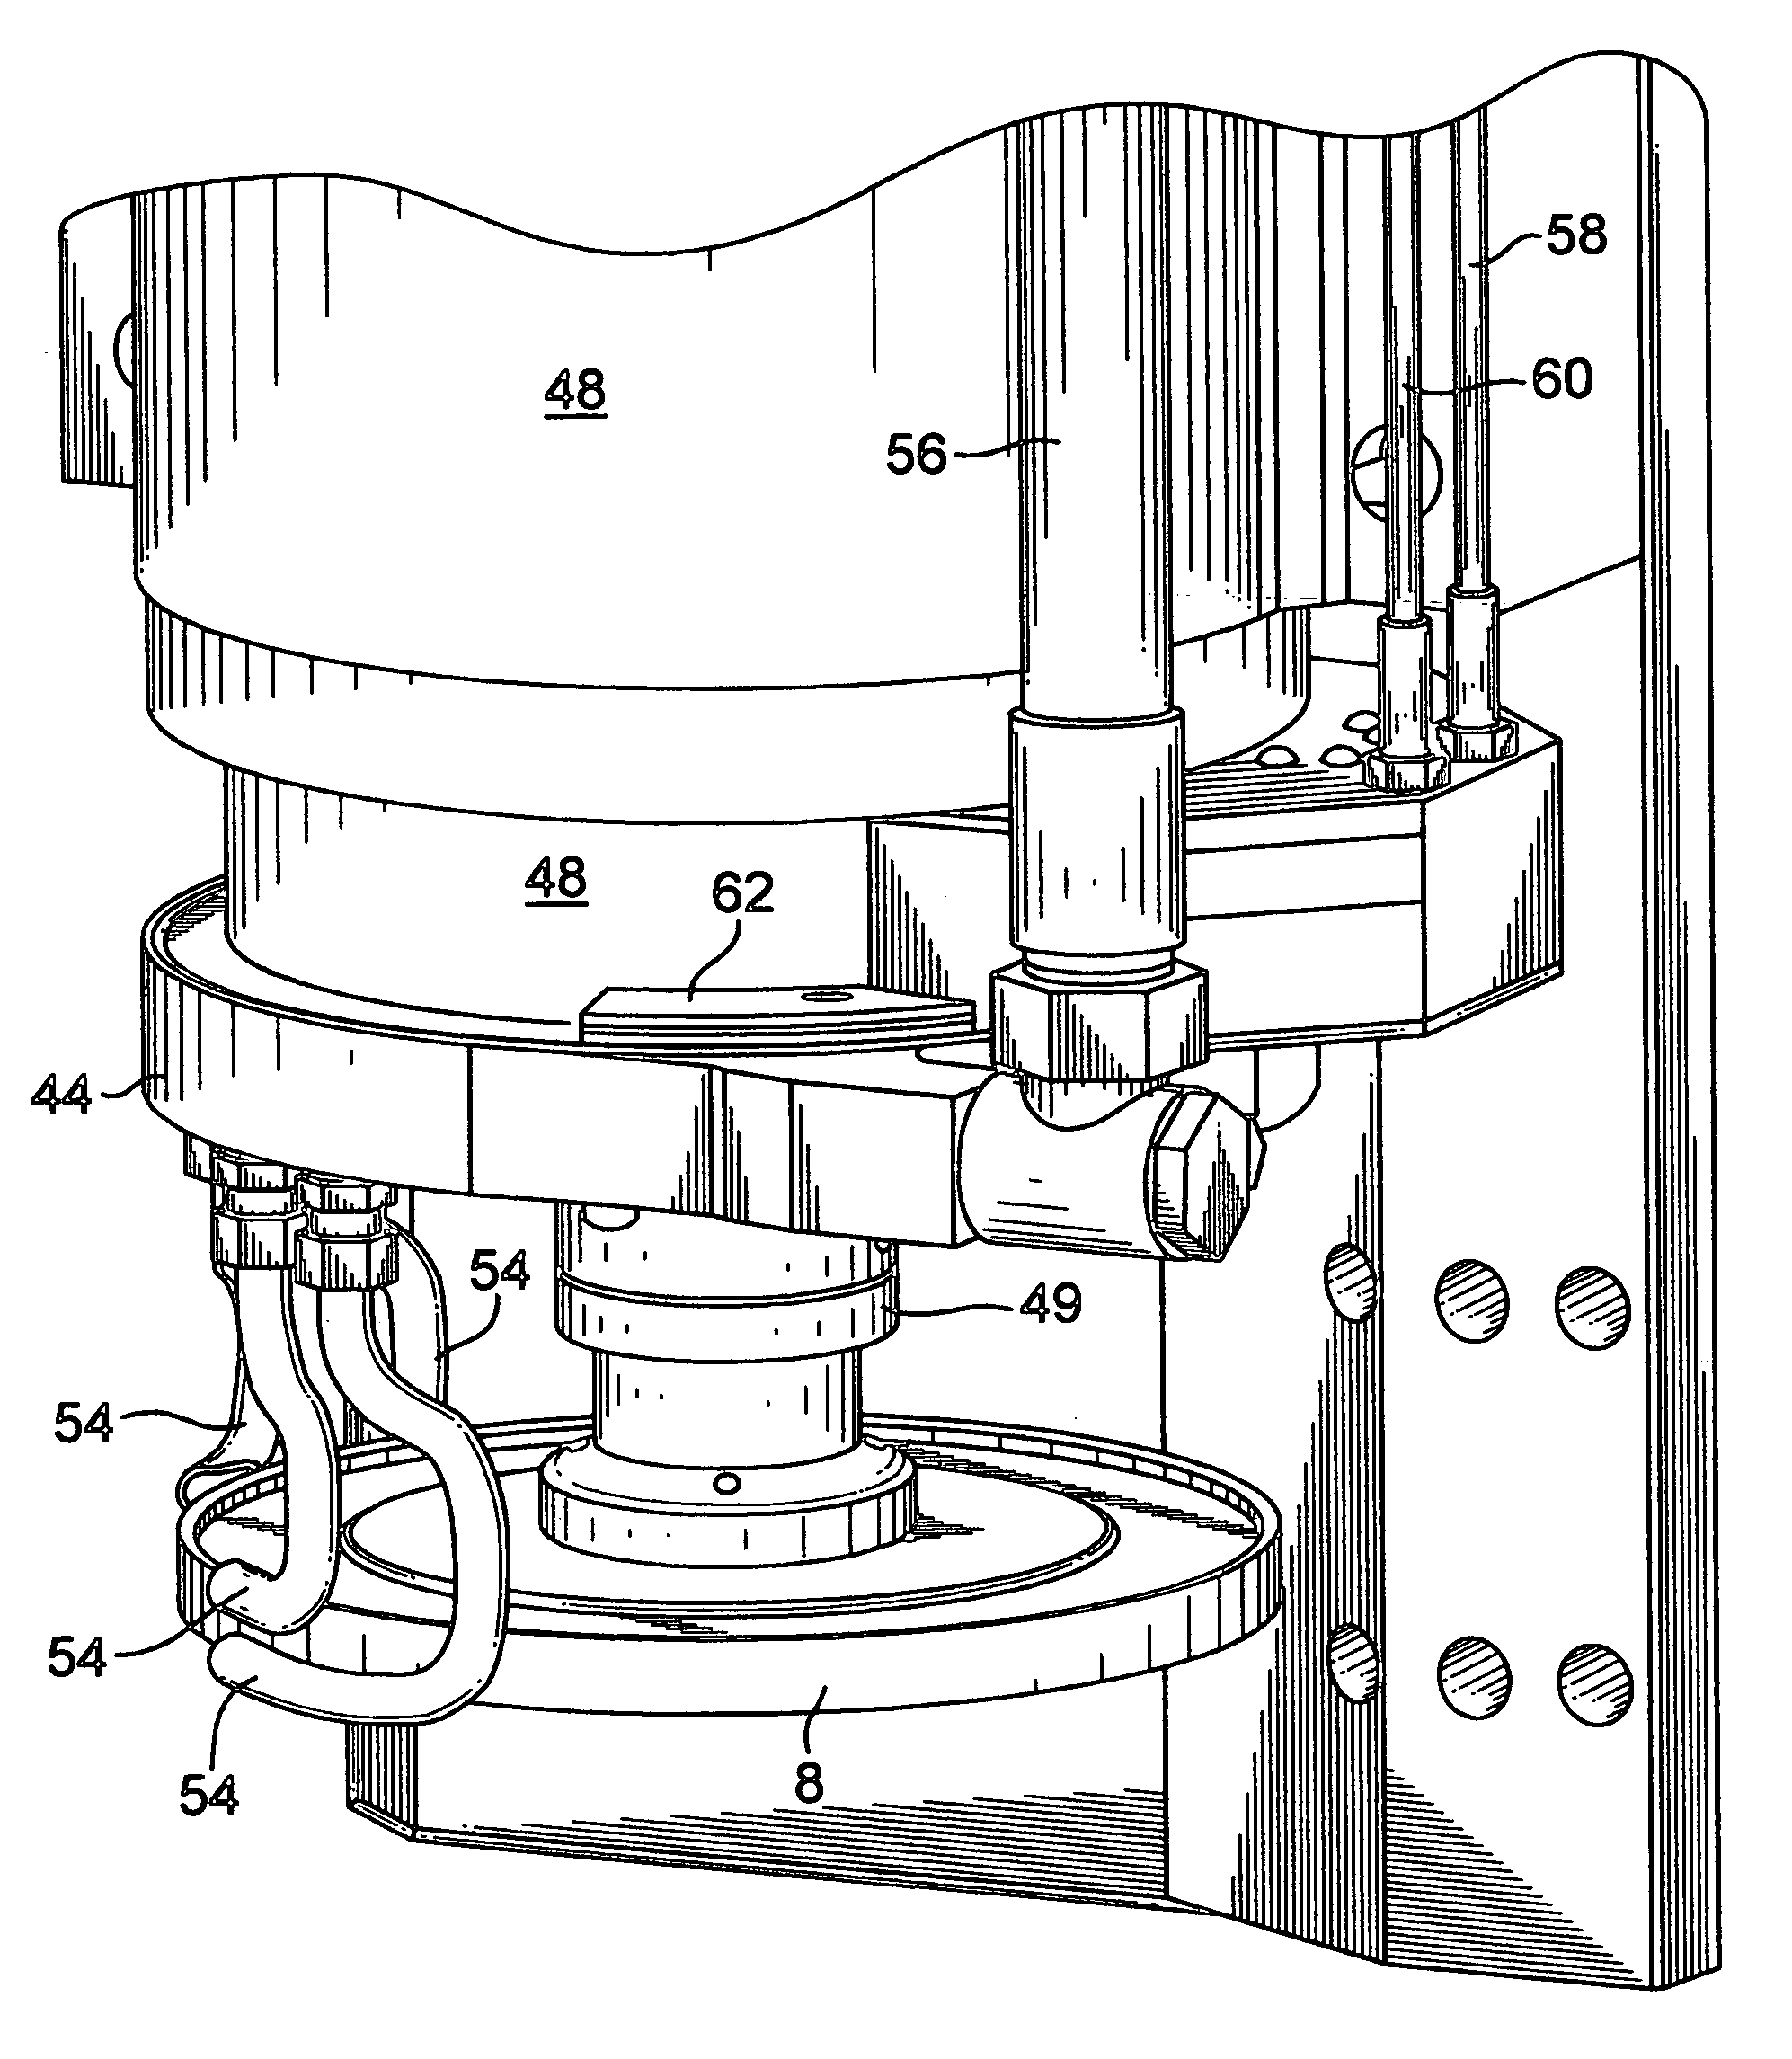 Coolant delivery apparatus for machine tool